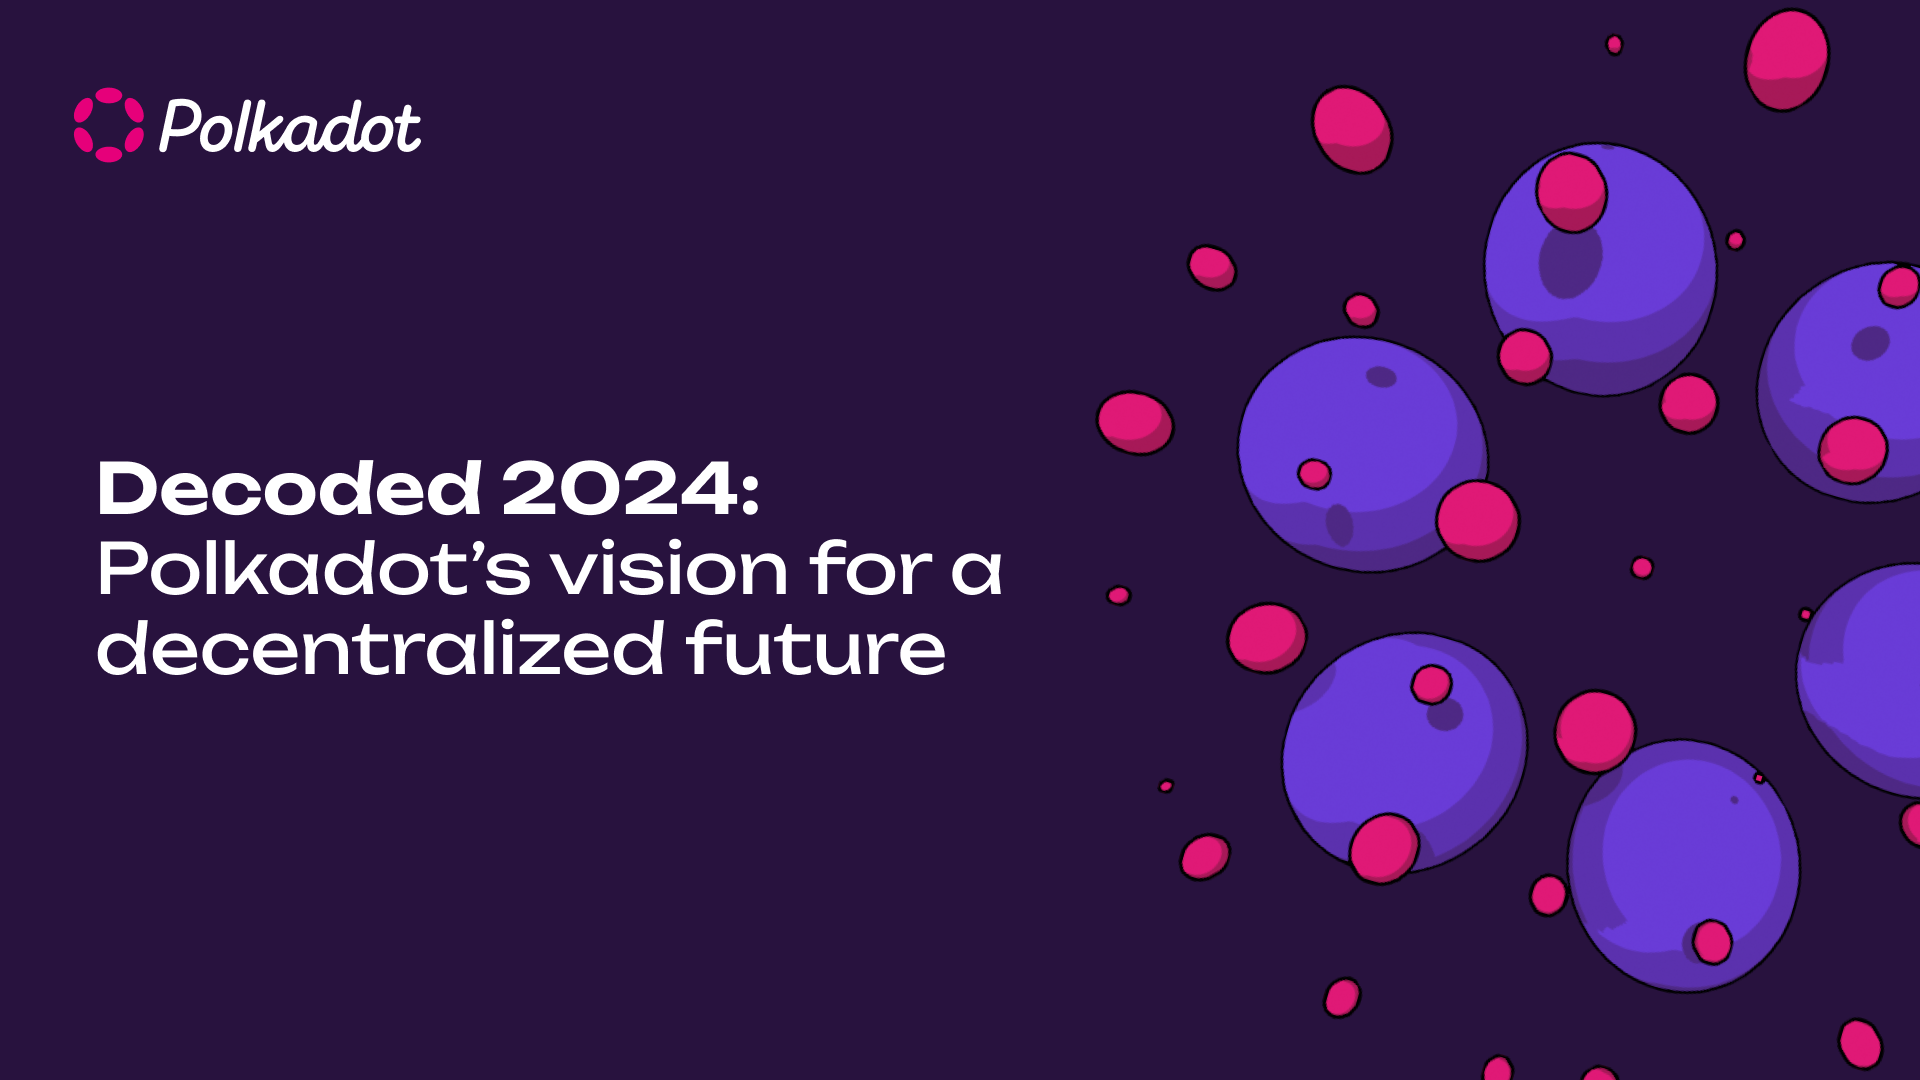 Decoded 2024: Polkadot’s vision for a decentralized future